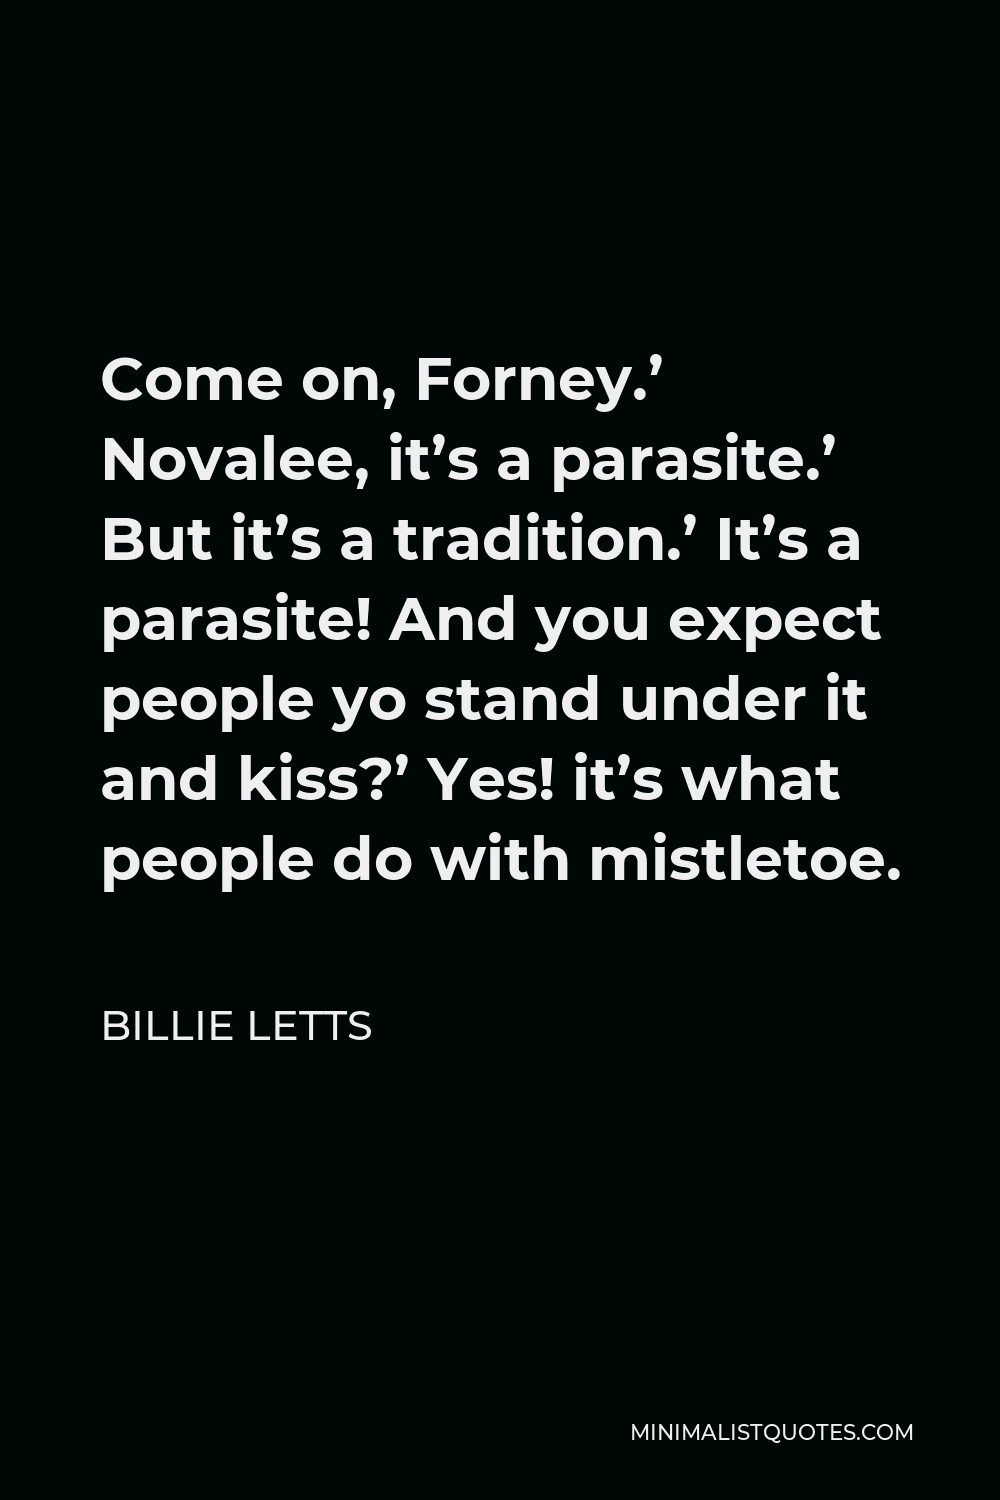 Billie Letts Quote - Come on, Forney.’ Novalee, it’s a parasite.’ But it’s a tradition.’ It’s a parasite! And you expect people yo stand under it and kiss?’ Yes! it’s what people do with mistletoe.